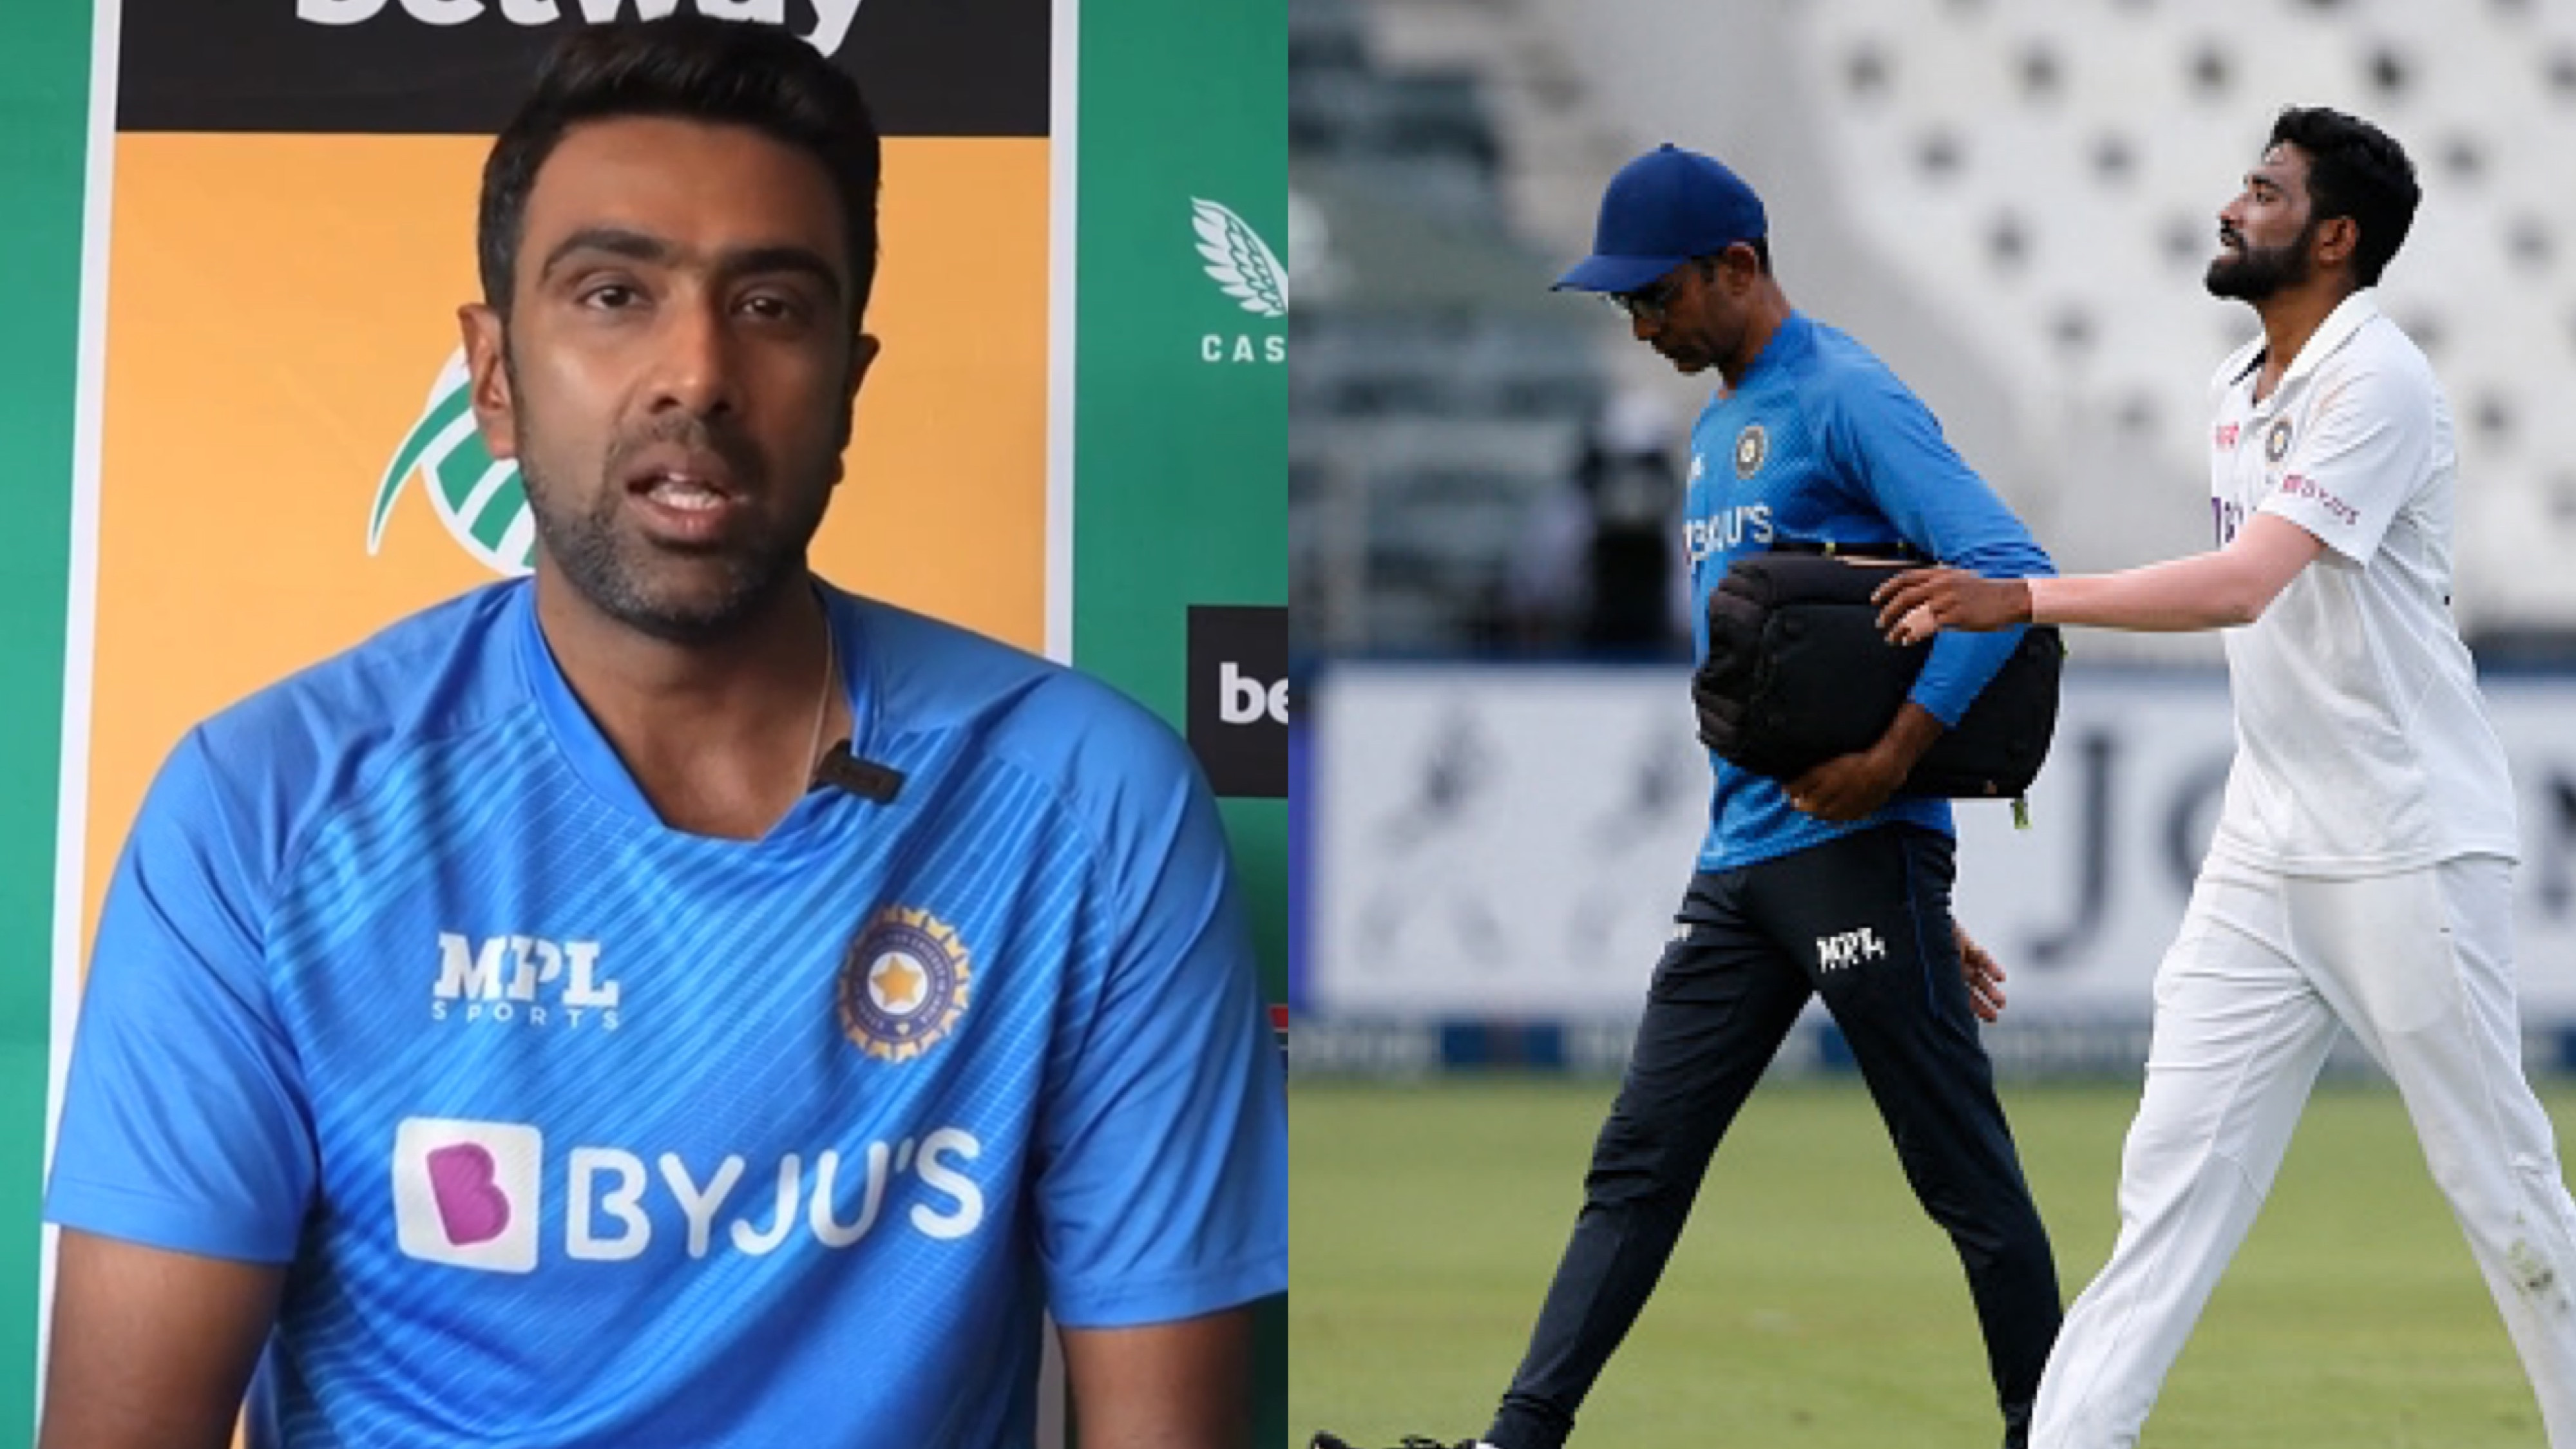 SA v IND 2021-22: Hoping Siraj will come out and give his best - R Ashwin 